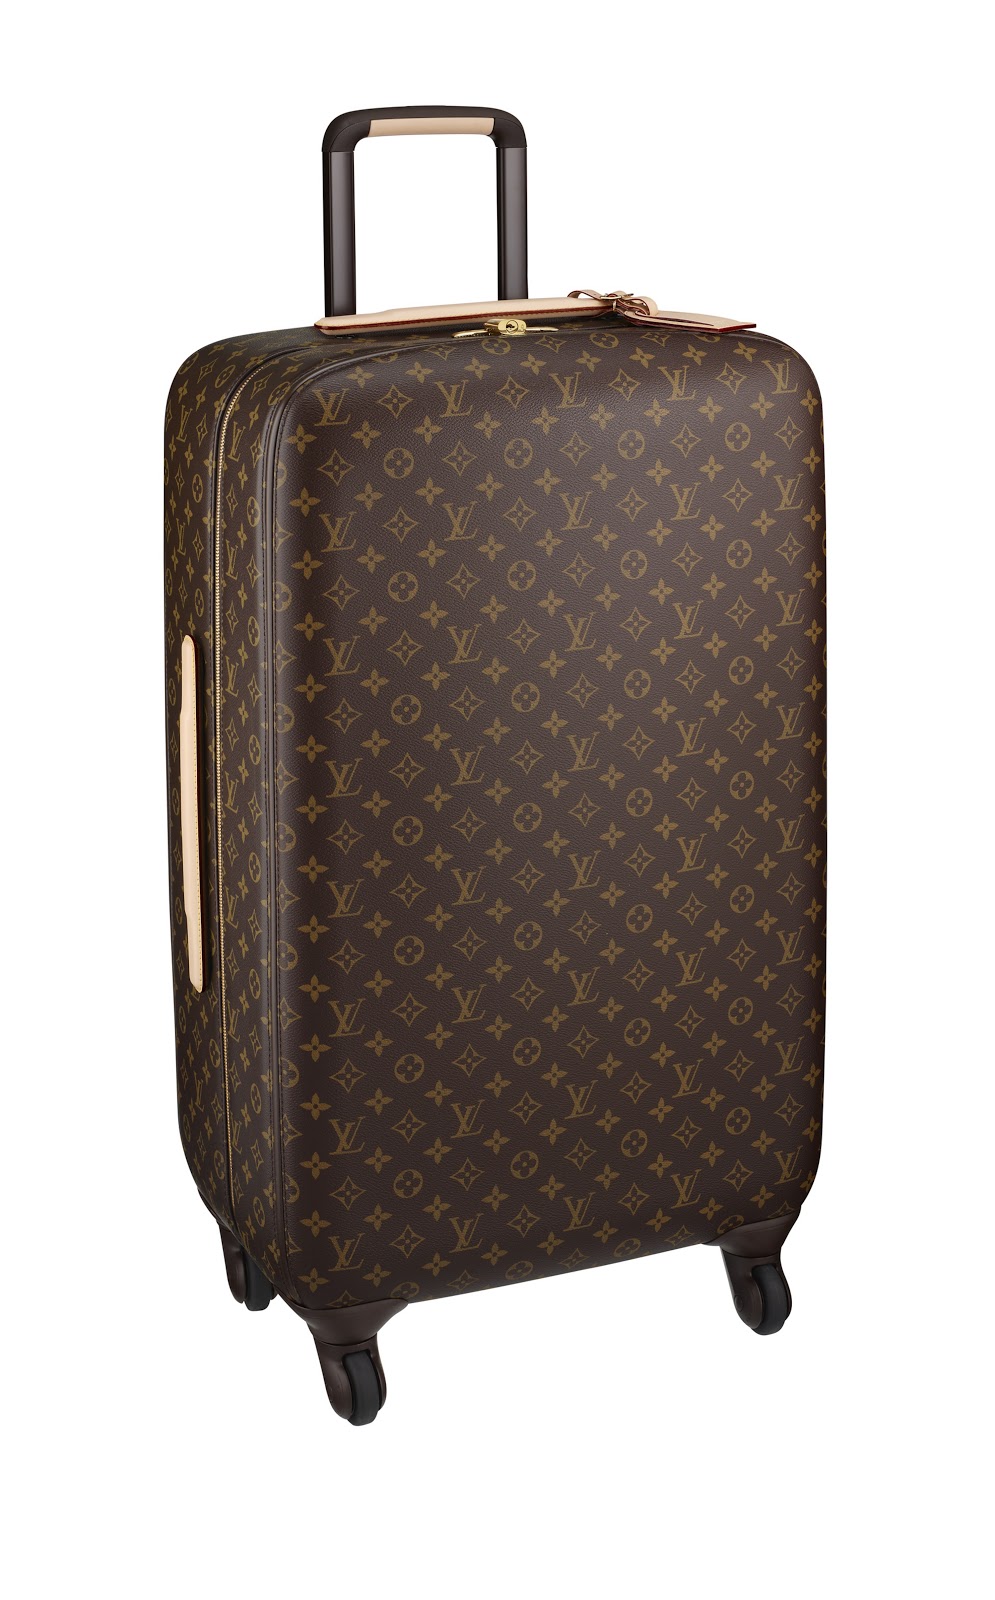 Louis Vuitton Zéphyr Four-Wheel Trolley |In LVoe with Louis Vuitton